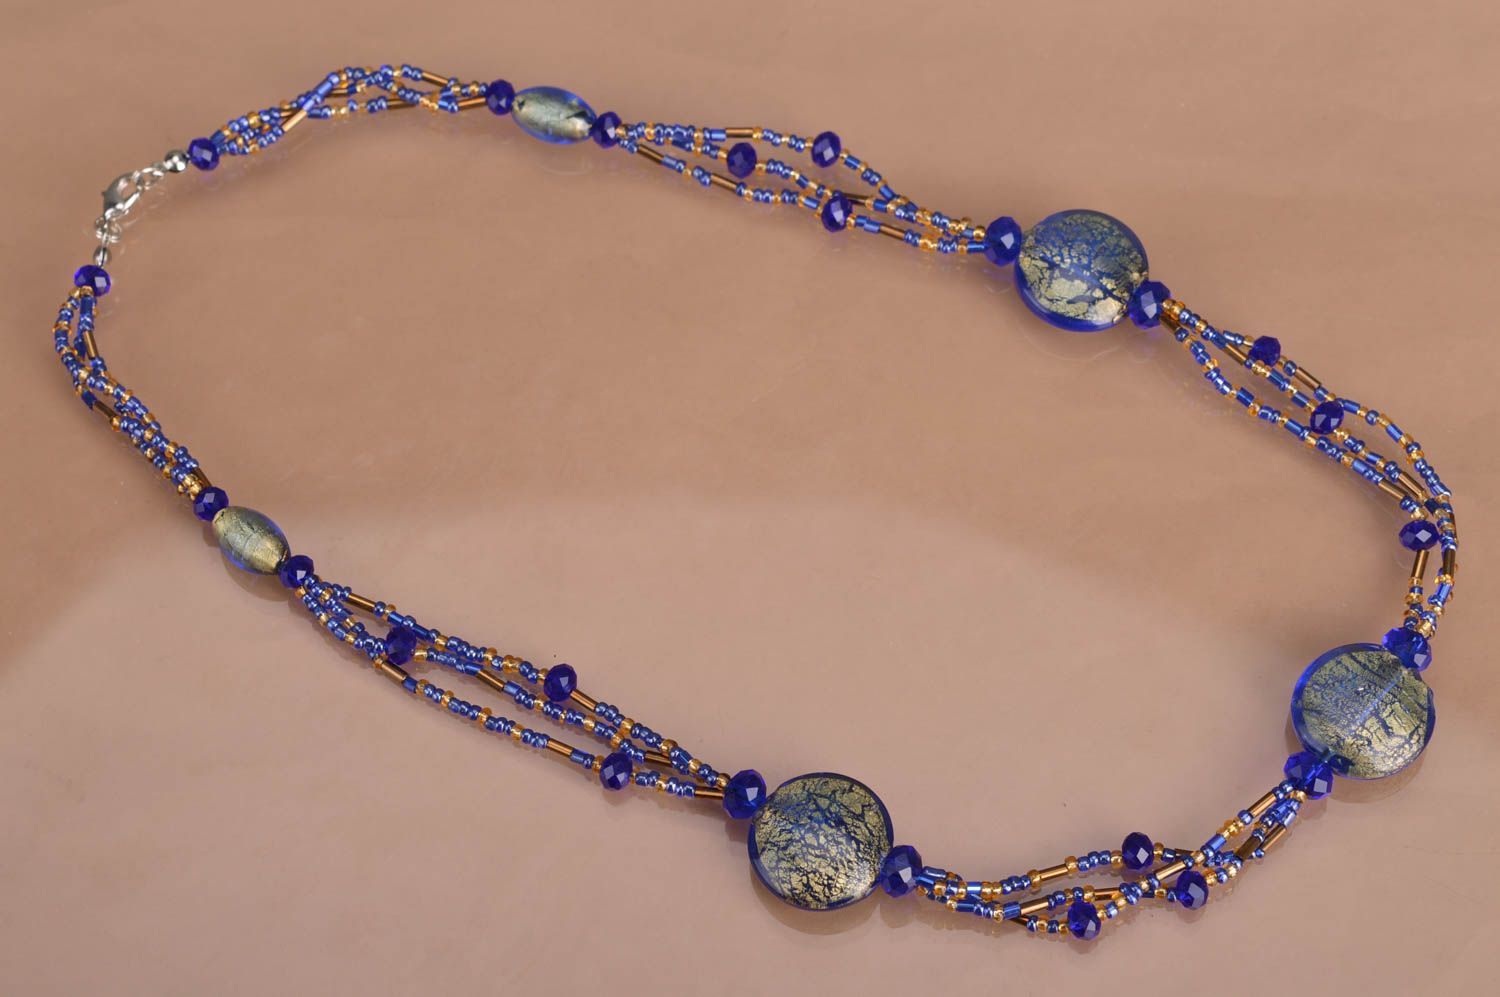 Handmade designer women's necklace with beads blue and golden festive stylish photo 2